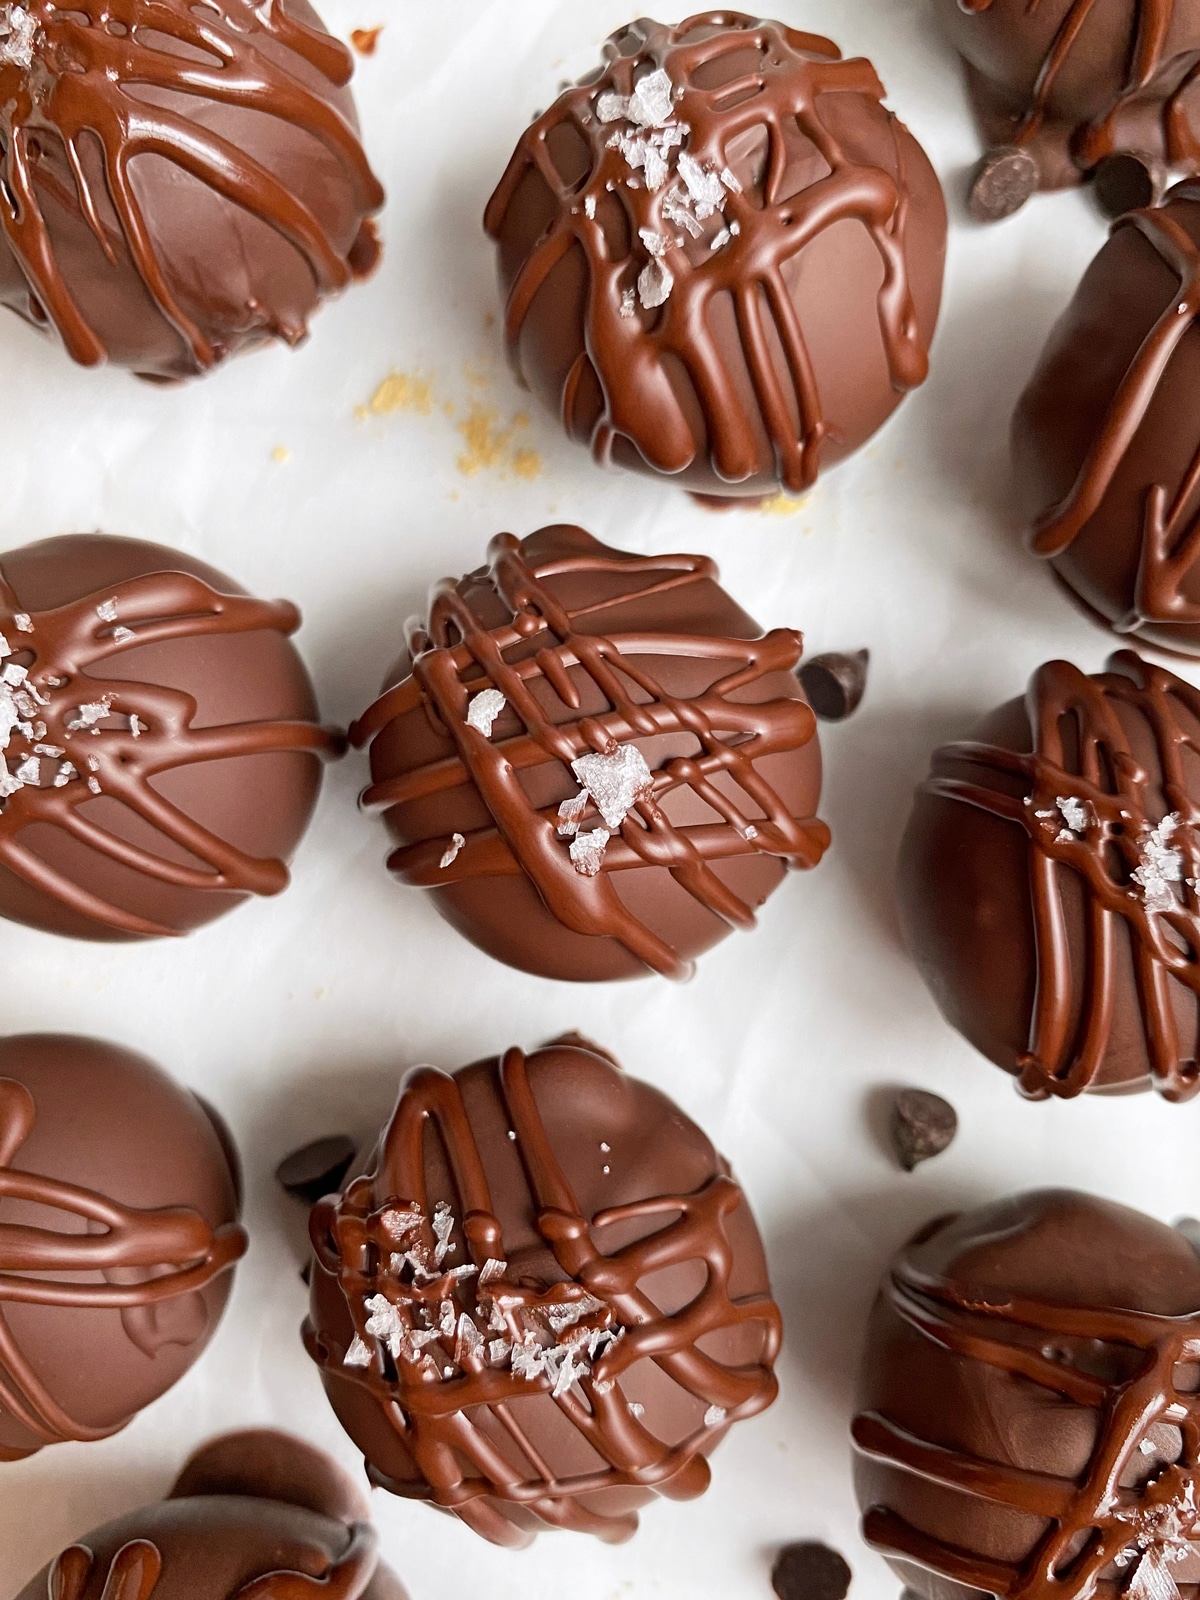 gingerbread truffles dipped in chocolate and topped with flaked sea salt